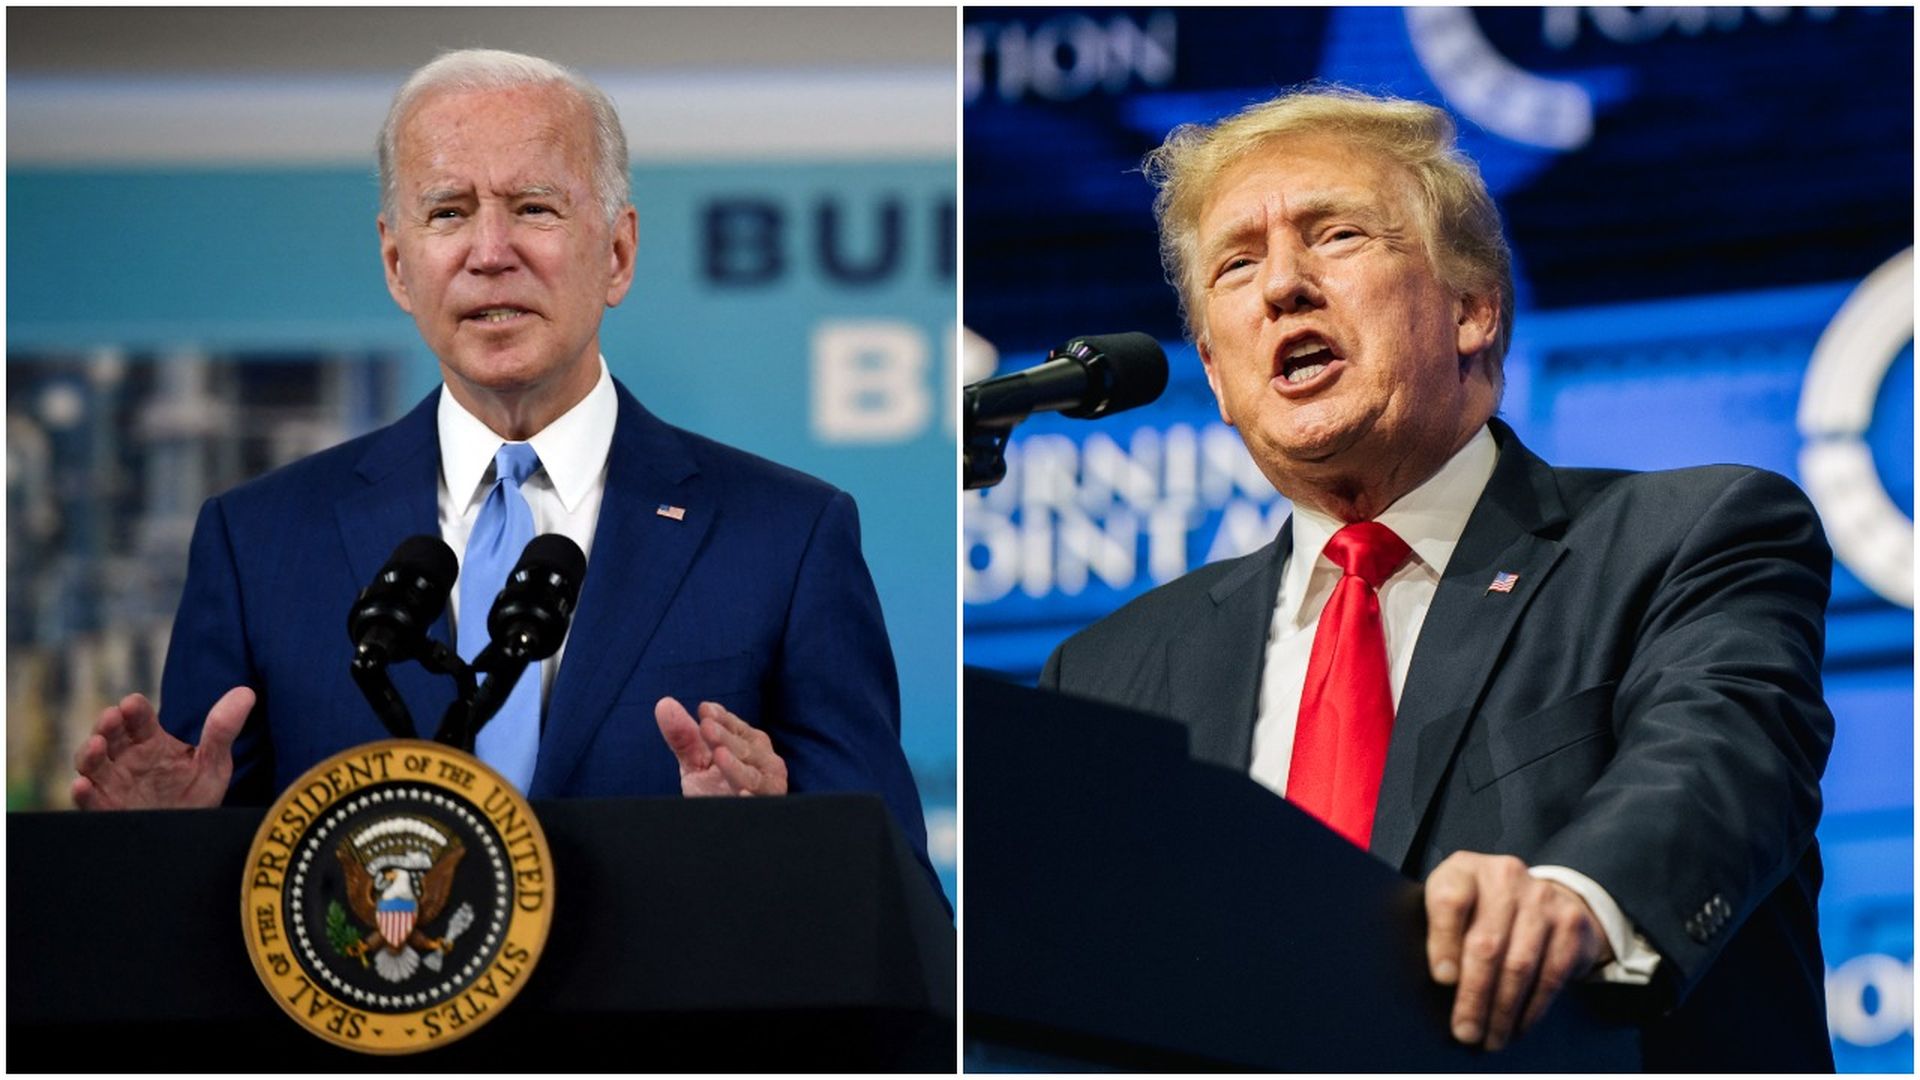 Photo of Joe Biden speaking on the left and Donald Trump speaking on the right